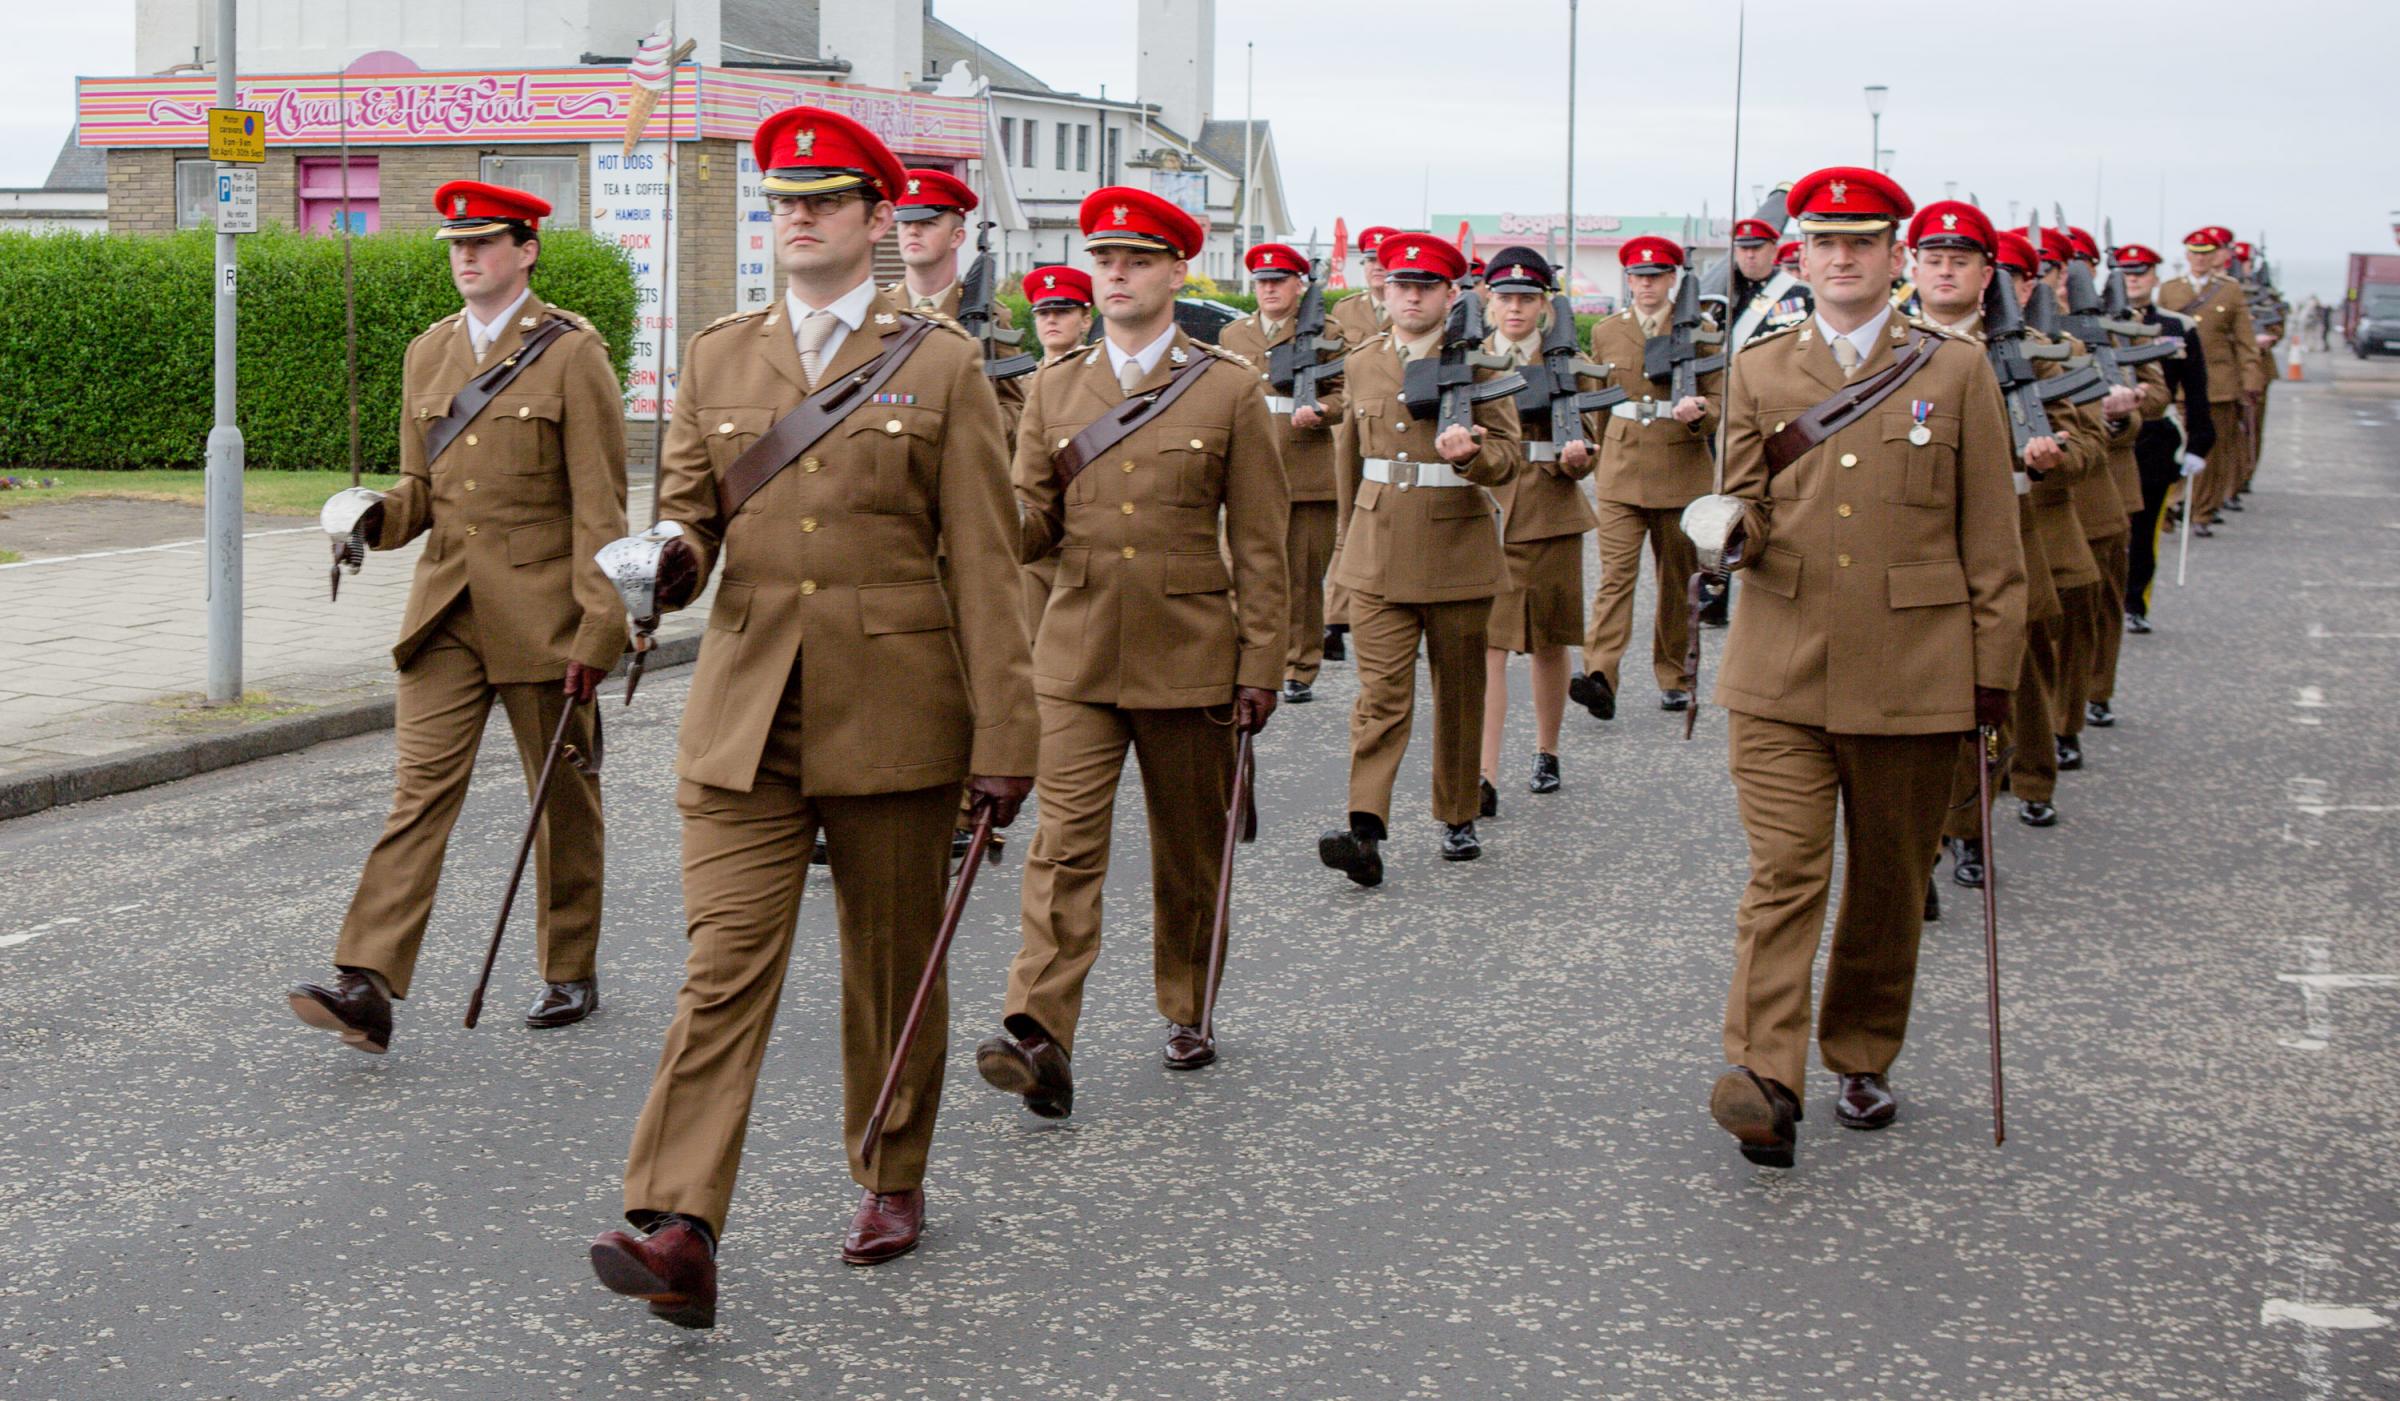 Marchers and soldiers on horseback paraded through Ayr on June 24 to mark the 225th anniversary of the Ayrshire Yeomanry (Photo: Sgt Murray Kerr RA)